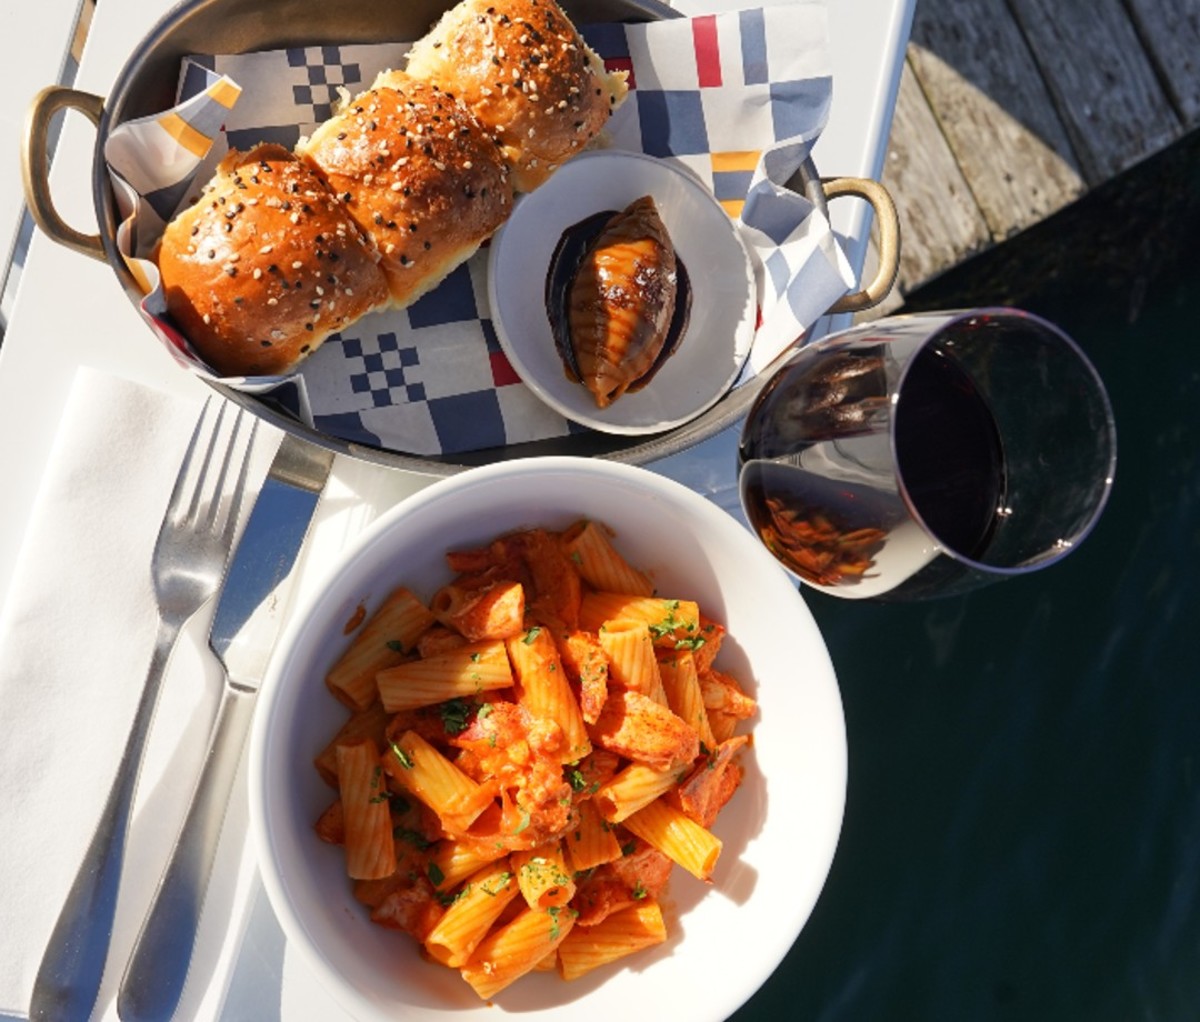 Plate of Lobster Rigatoni Alla Vodka with bread rolls and red wine